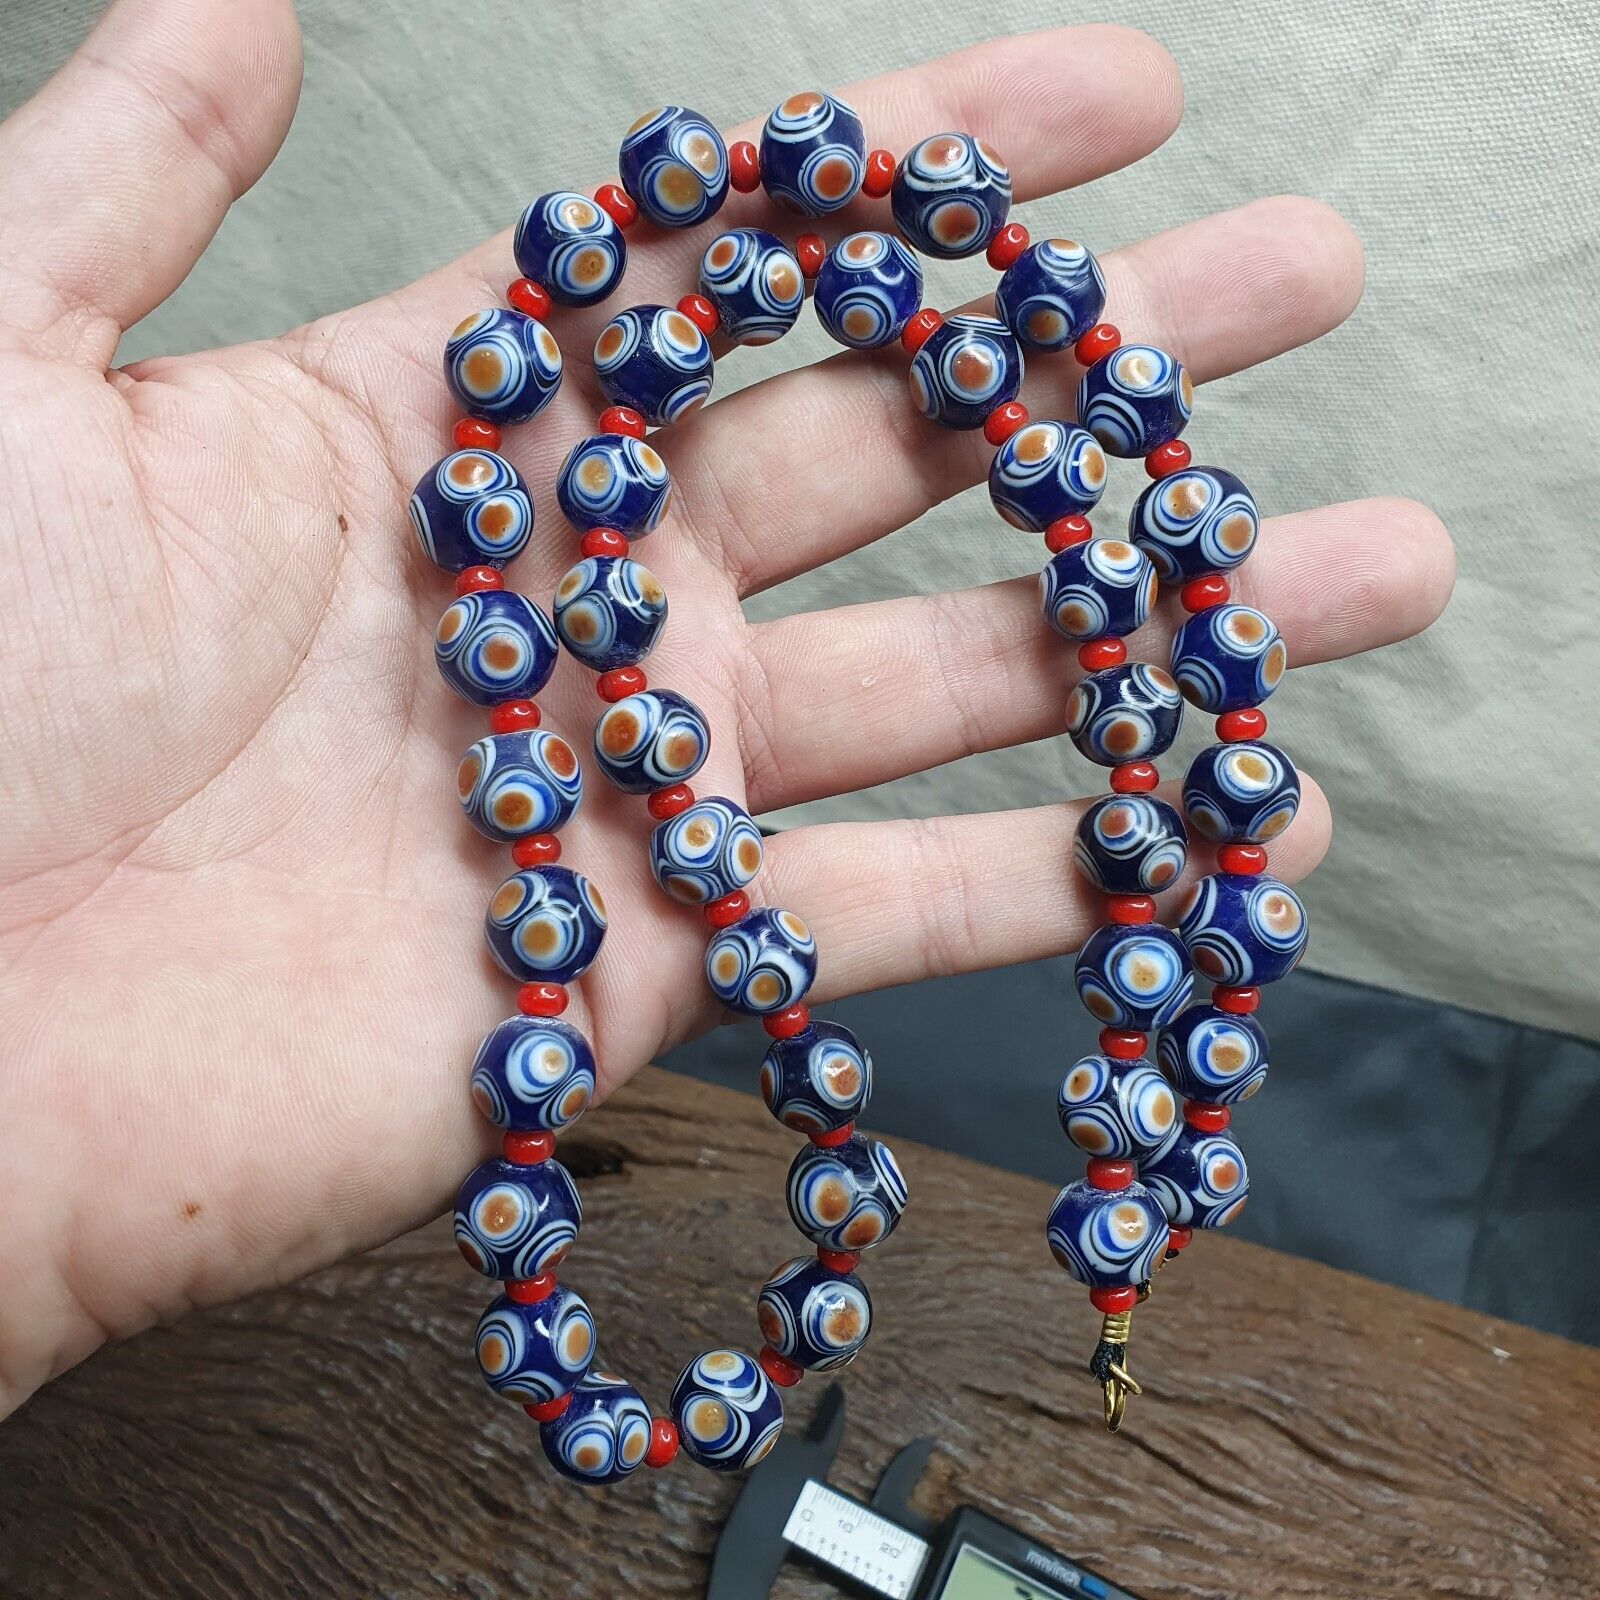 Handcrafted Amazing Hundred Eyes Beads with Venetian Red Whiteheart Beads Necklace: Unique Artisanal Statement Jewelry Piece